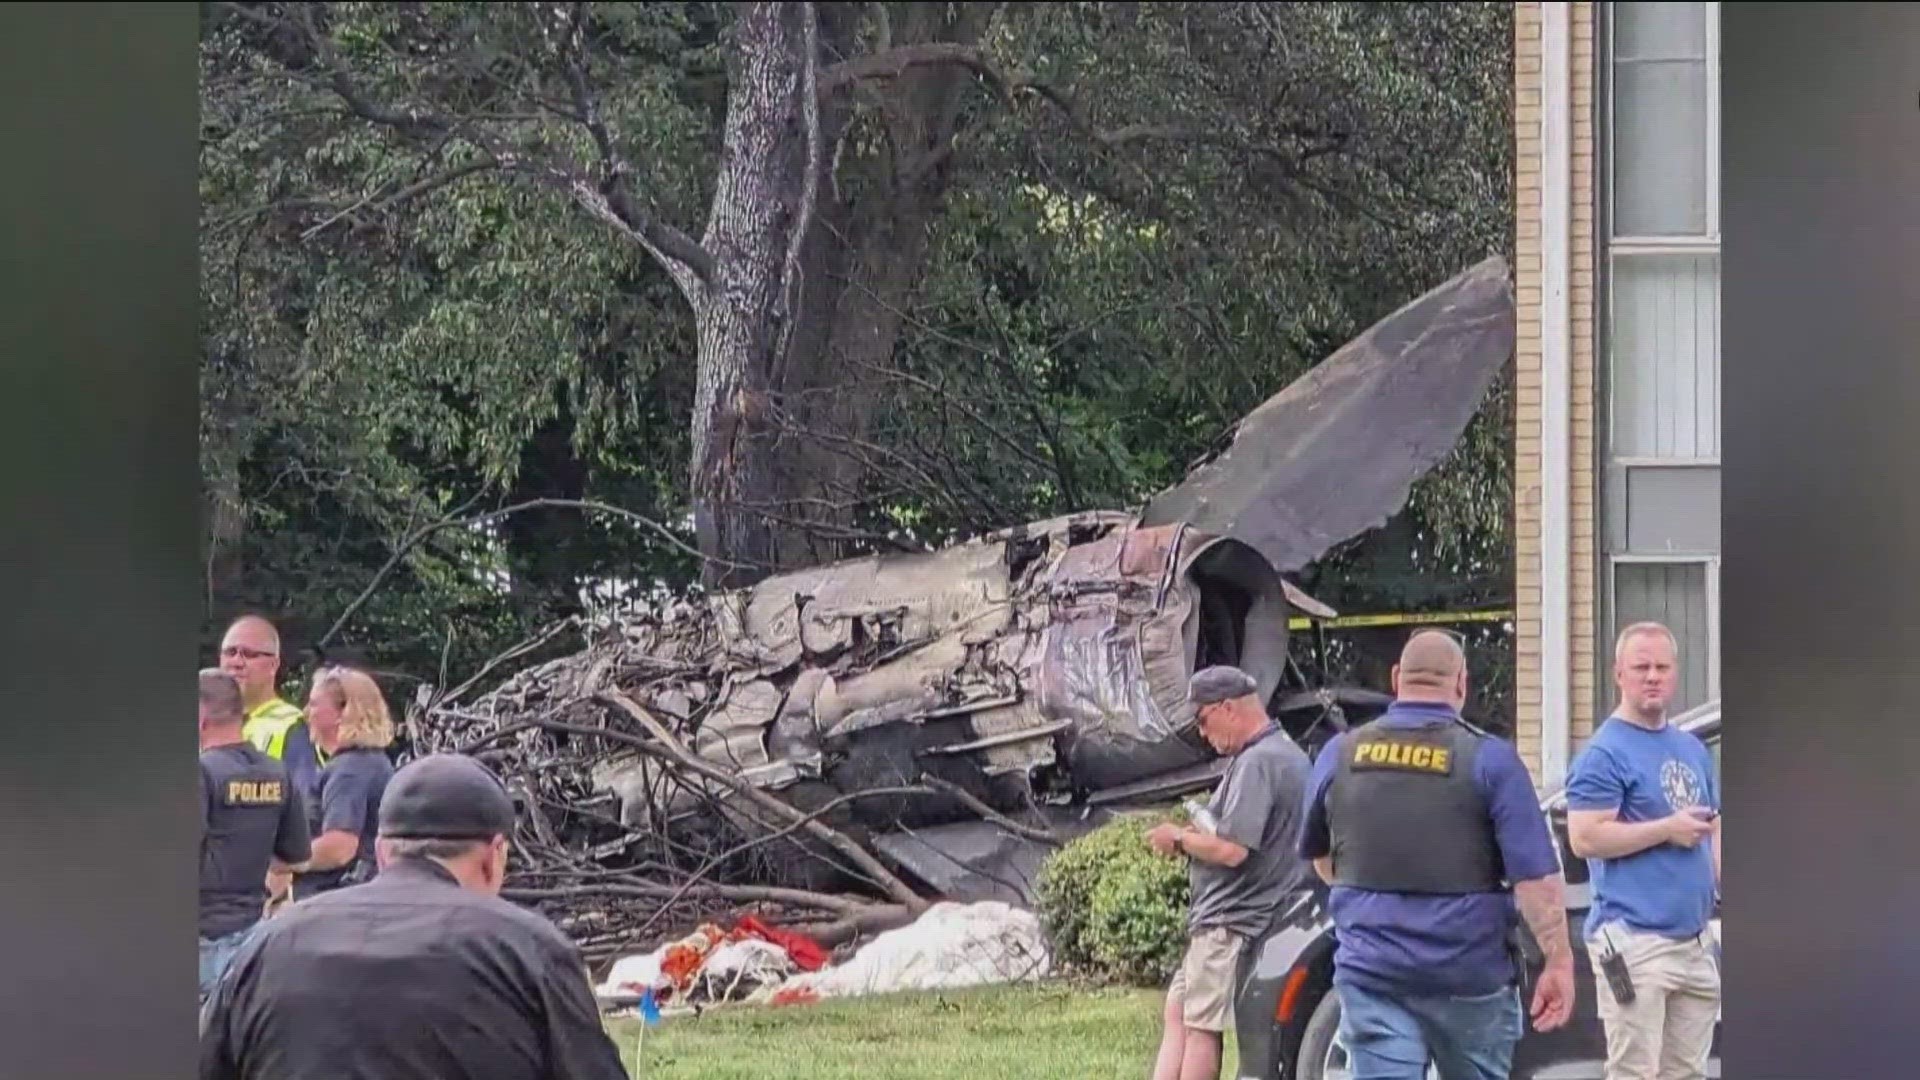 "It's a miracle": The MiG-23 aircraft crashed into an abandoned golf course and settled right next to an occupied apartment building. No one was seriously injured.